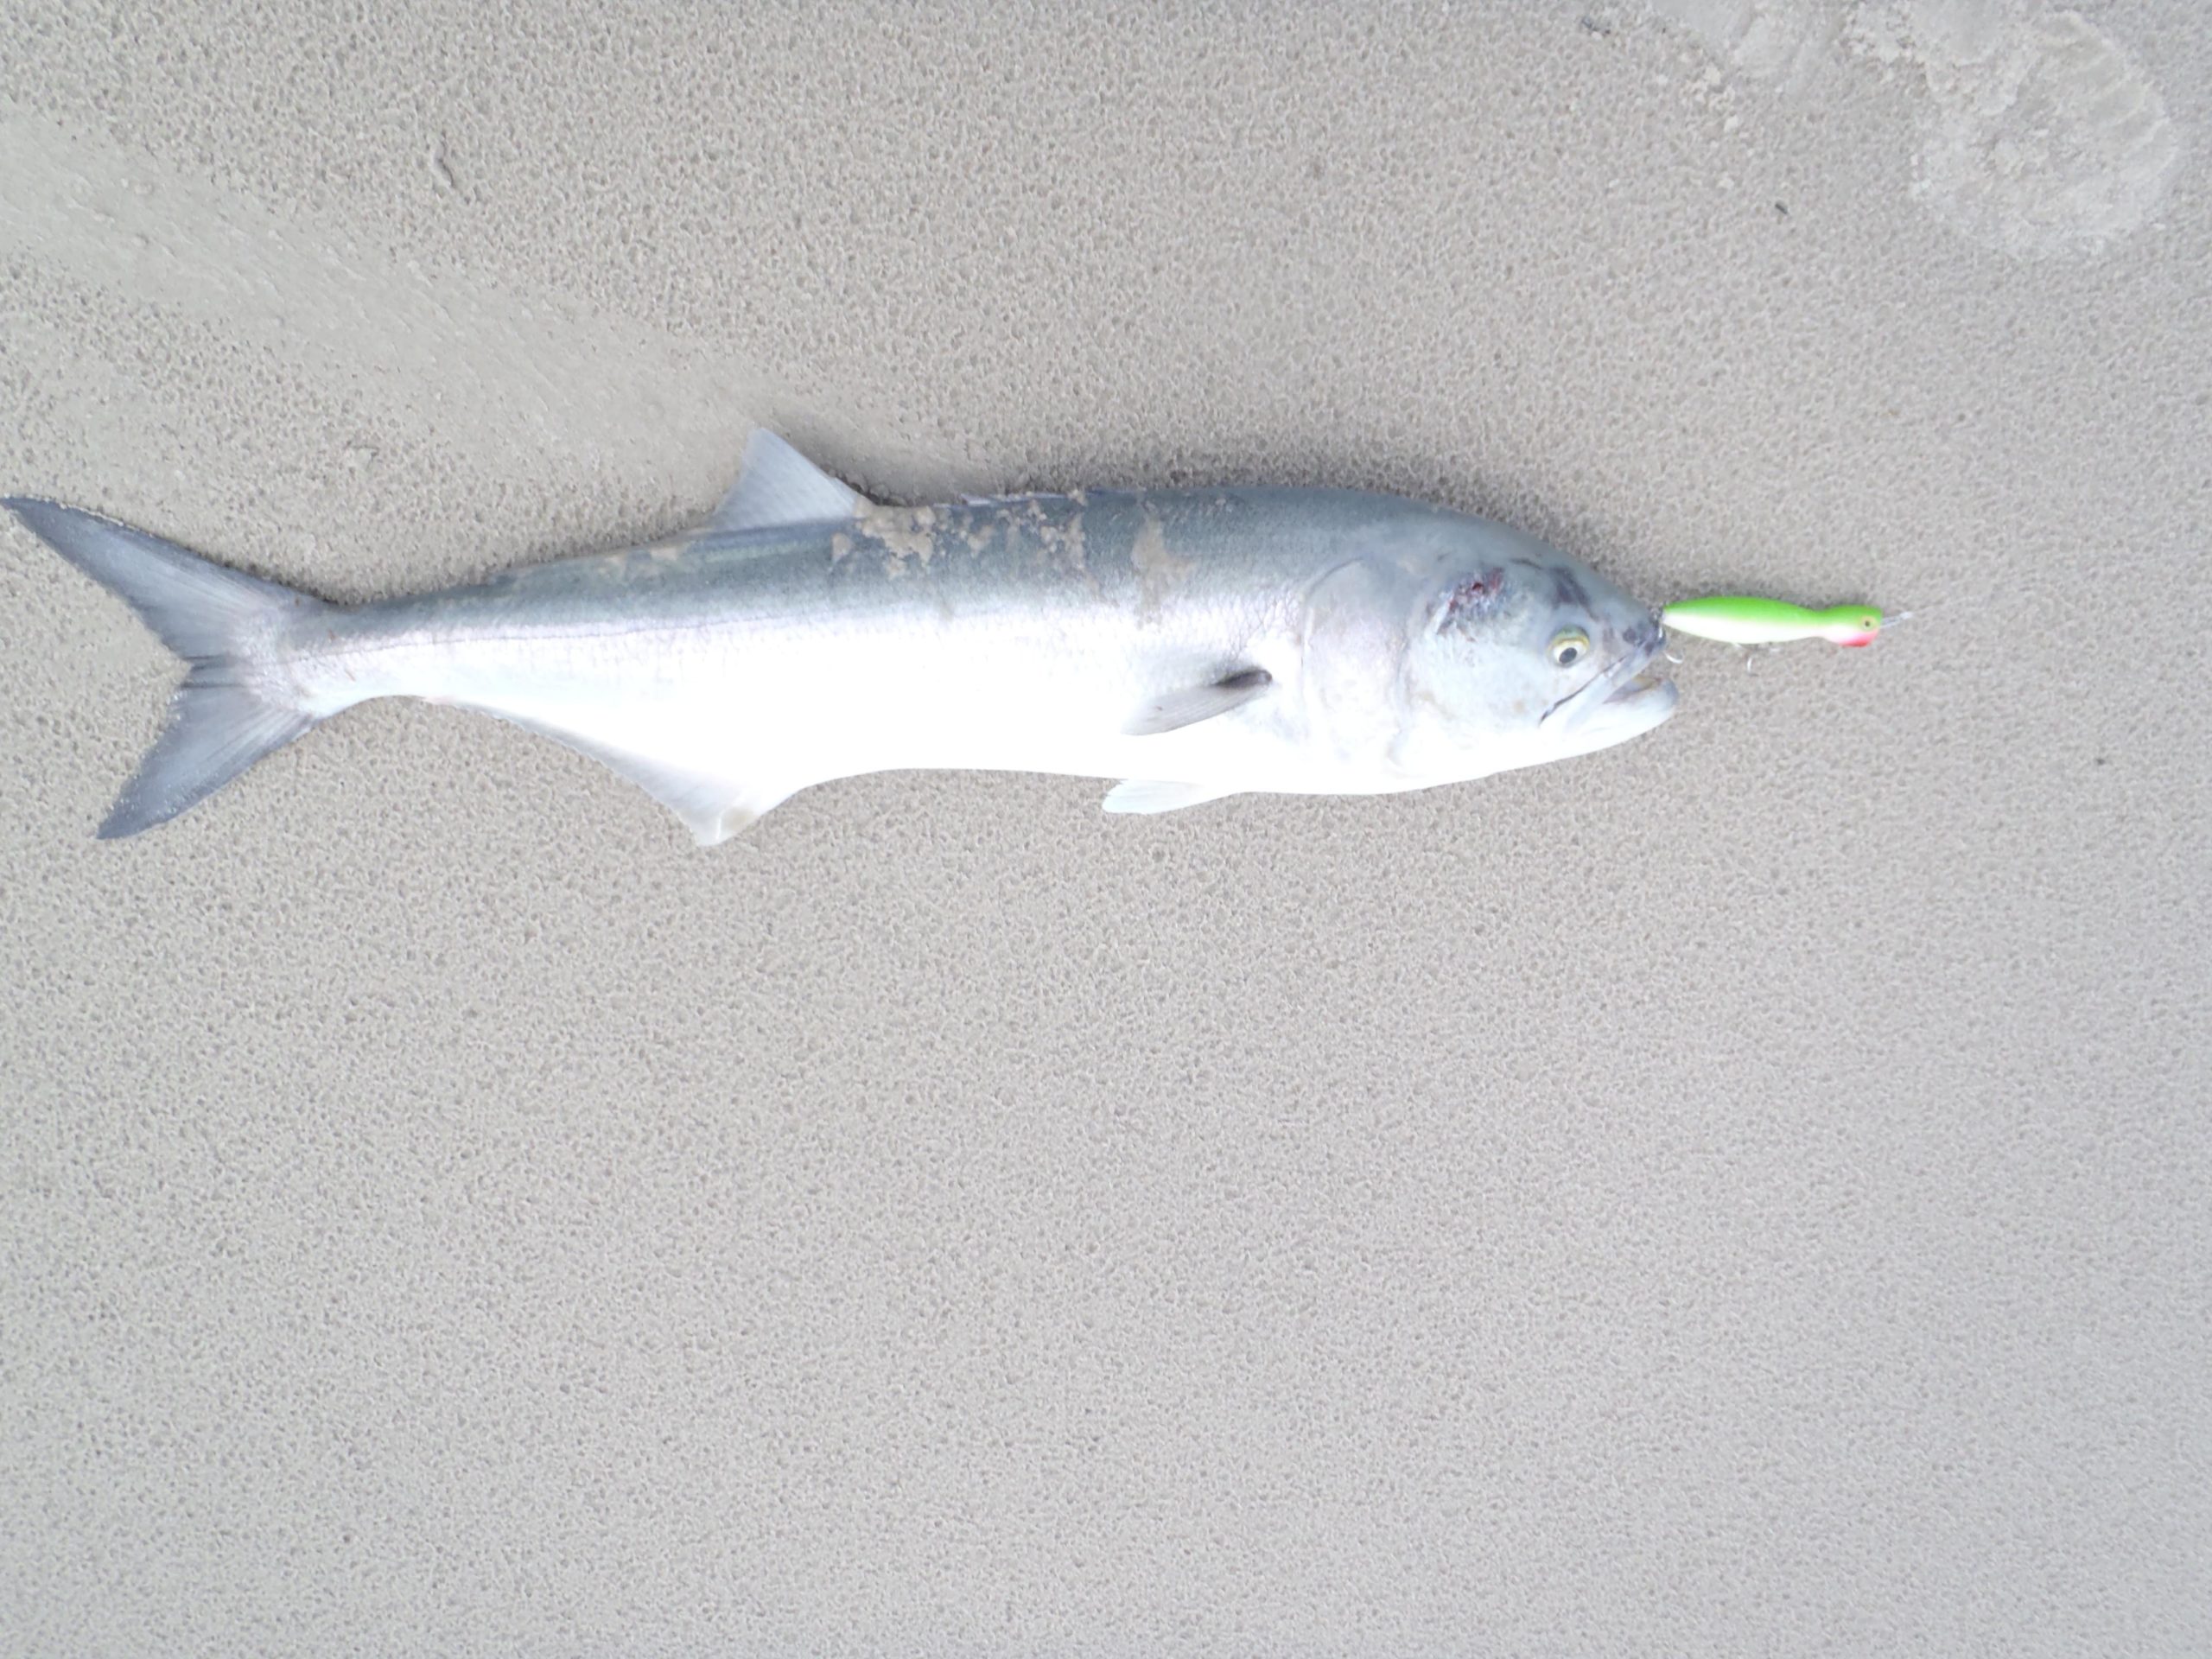 Surf: Bait or Lures? - The Fisherman